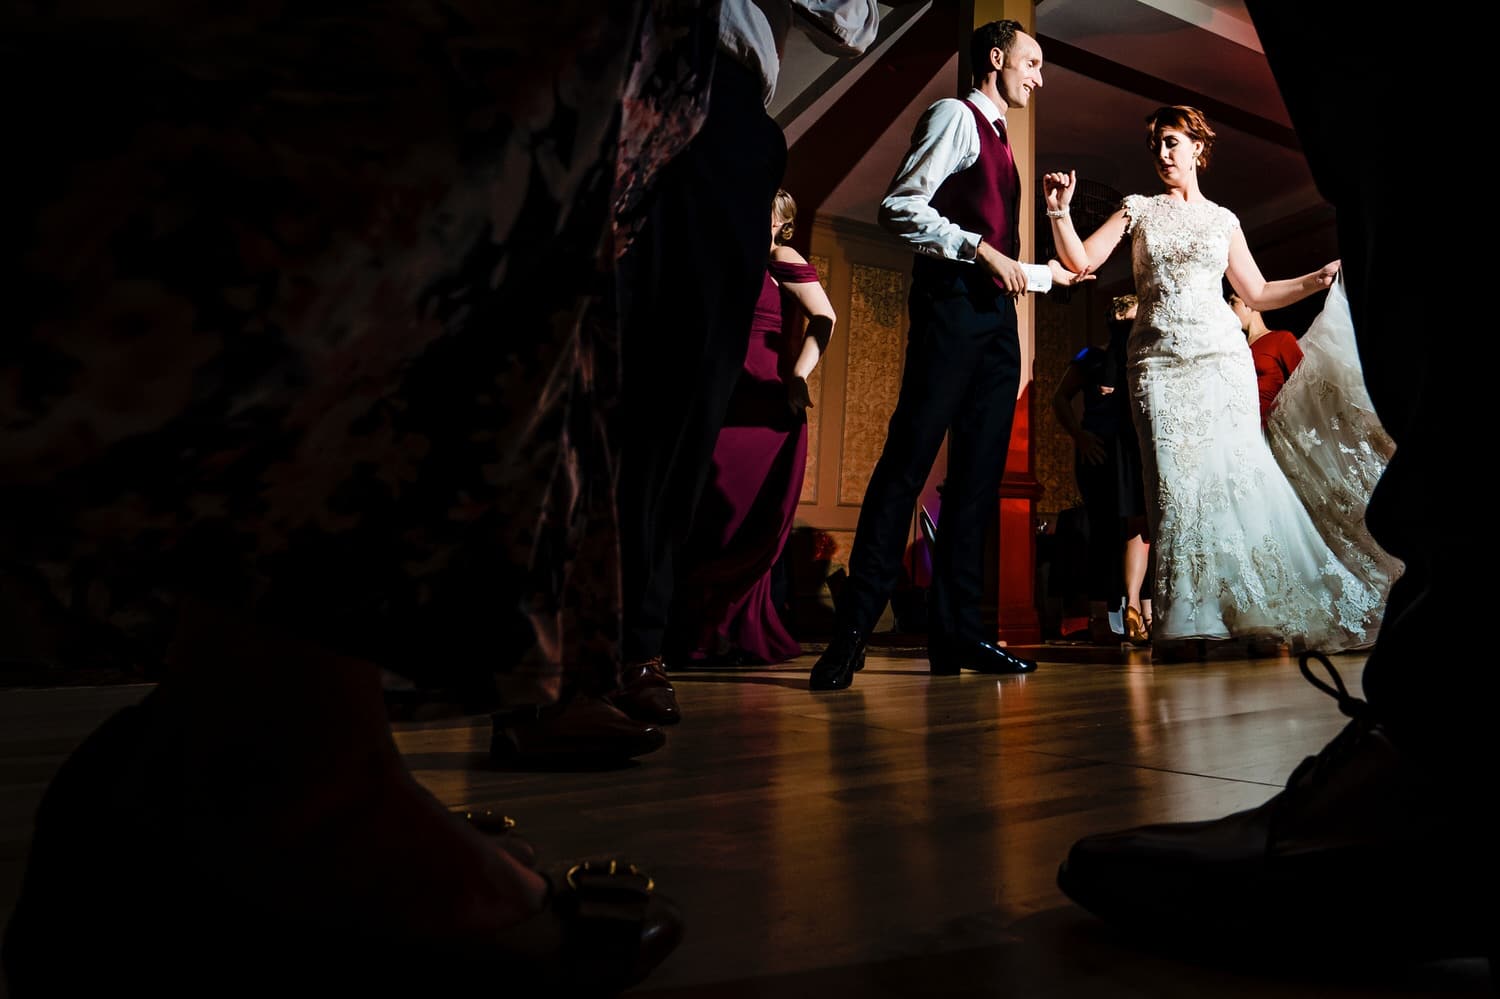 A candid picture taken through the legs of dancers of a bride and groom spotlit in the middle of the dance floor during their wedding reception at The Elms. 